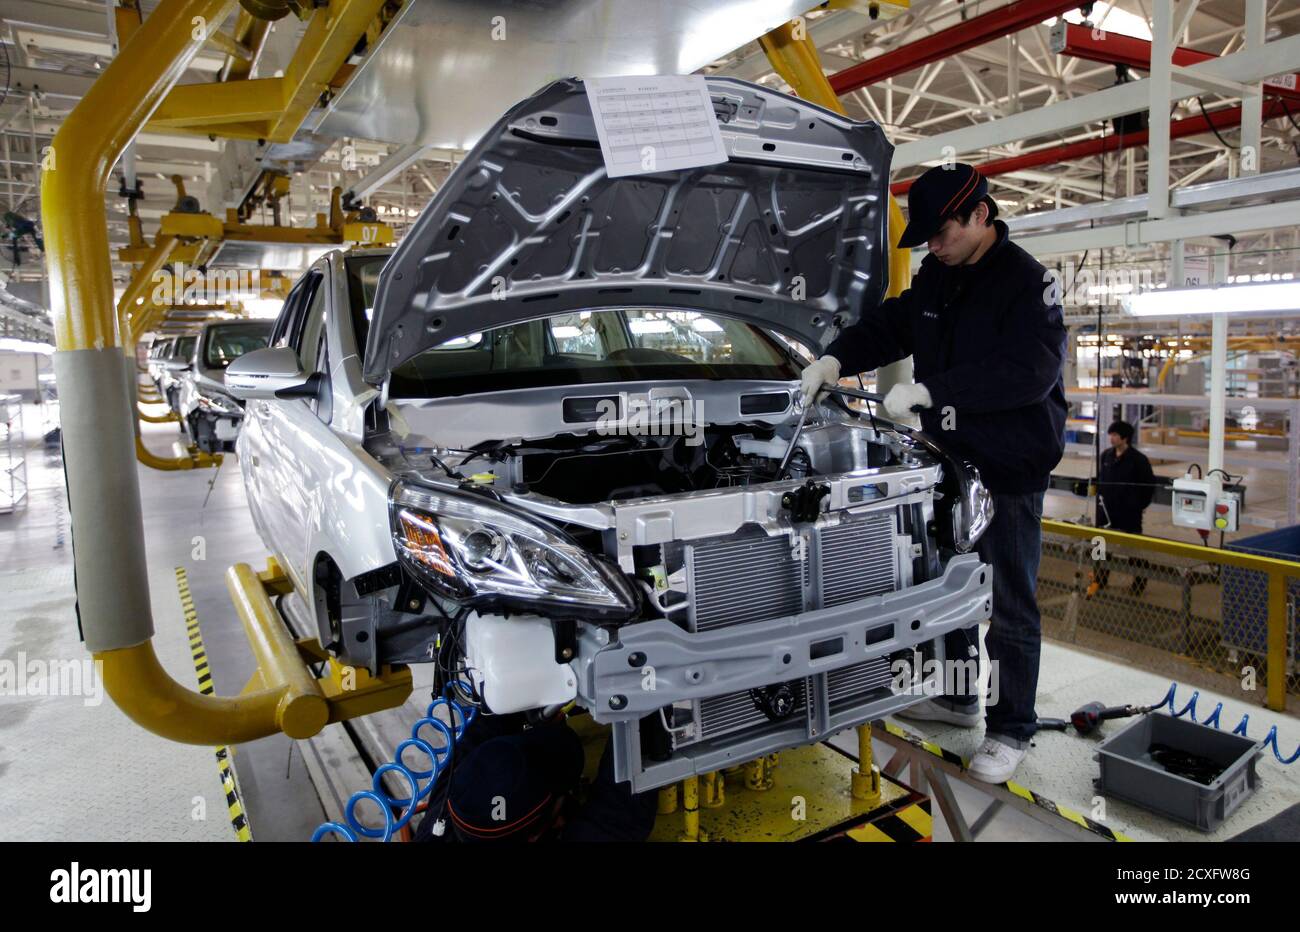 An employee works on the Beiqi E150EV car assembly line of Beijing Electric Vehicle Company, in Beijing November 7, 2012. China's central government will allocate funding to support technological innovation projects such as electric vehicles, plug-in hybrid vehicles and fuel cell vehicles in the nation's new energy auto industry, according to an announcement from the Ministry of Finance. A statement on the ministry's website also said that funds will be used to support the development of new vehicle batteries. REUTERS/Jason Lee (CHINA - Tags: TRANSPORT BUSINESS ENERGY SCIENCE TECHNOLOGY) Stock Photo